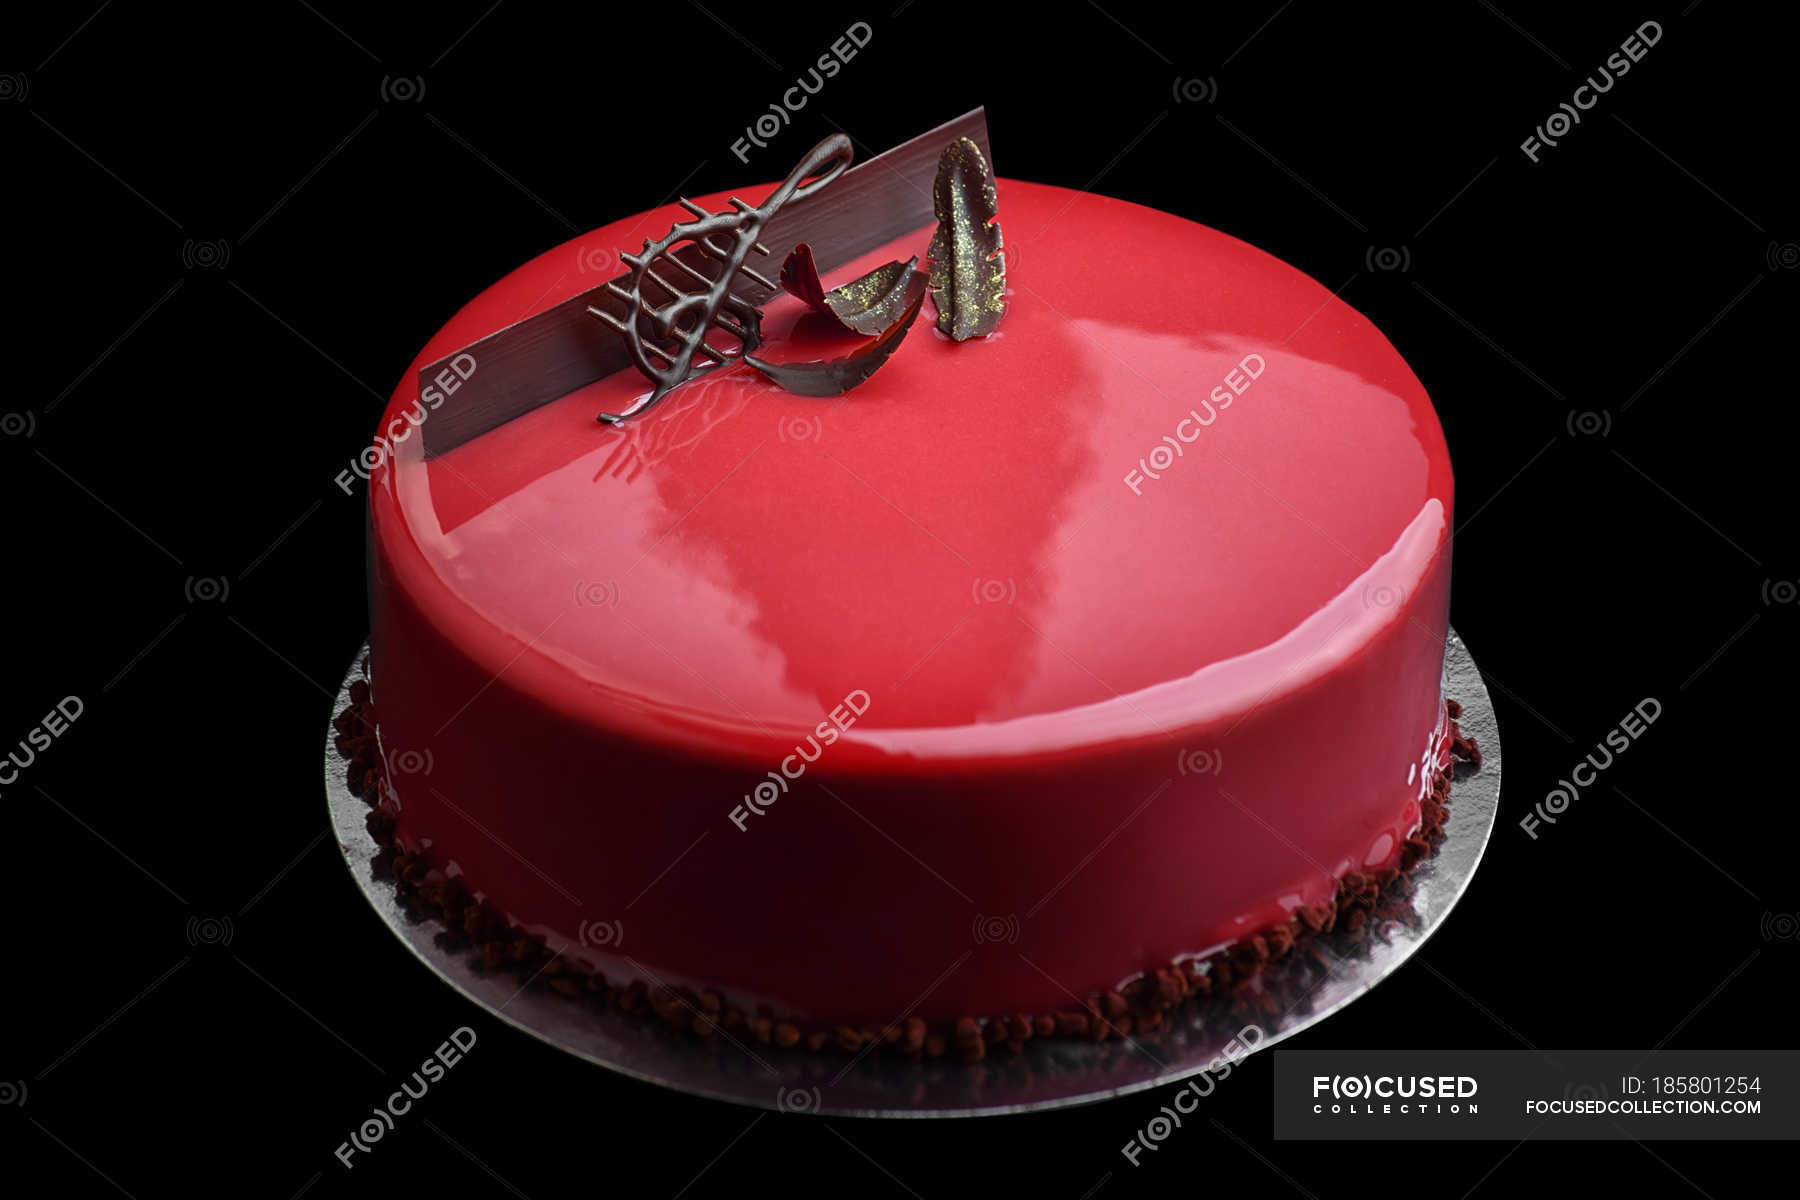 Cake with red glaze and chocolate music key decoration — gourmet ...